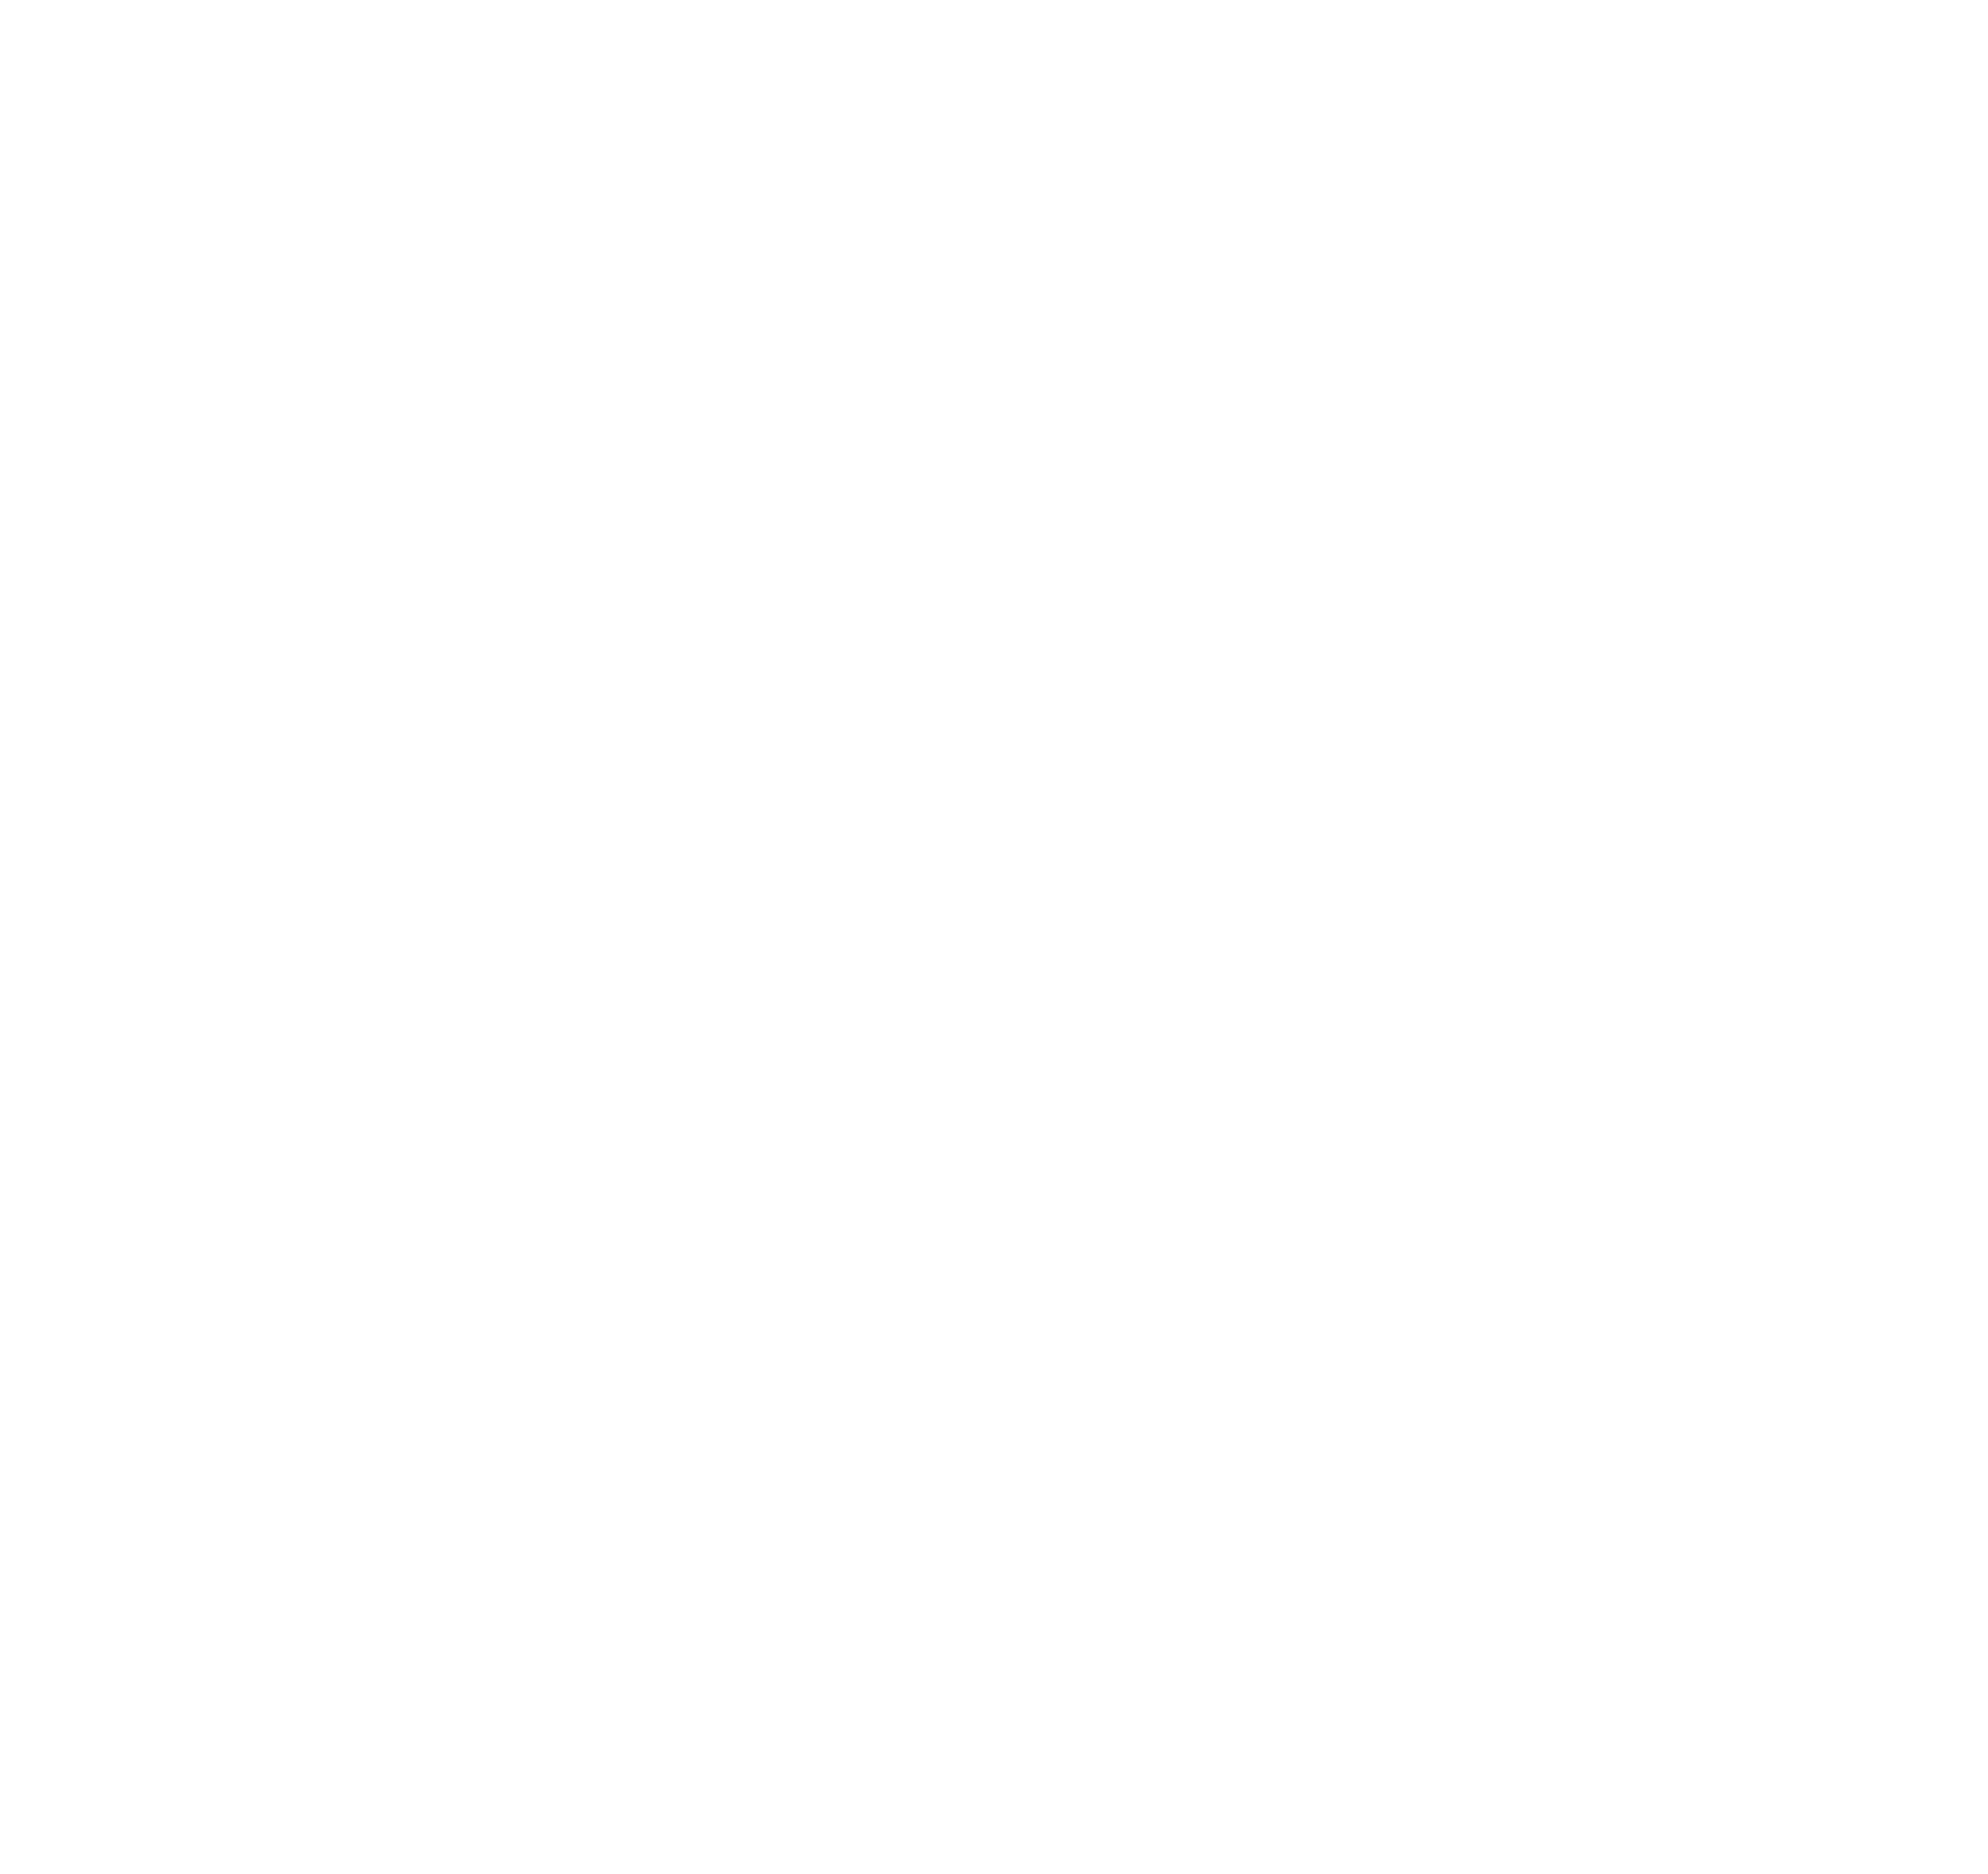 Jedford Collies